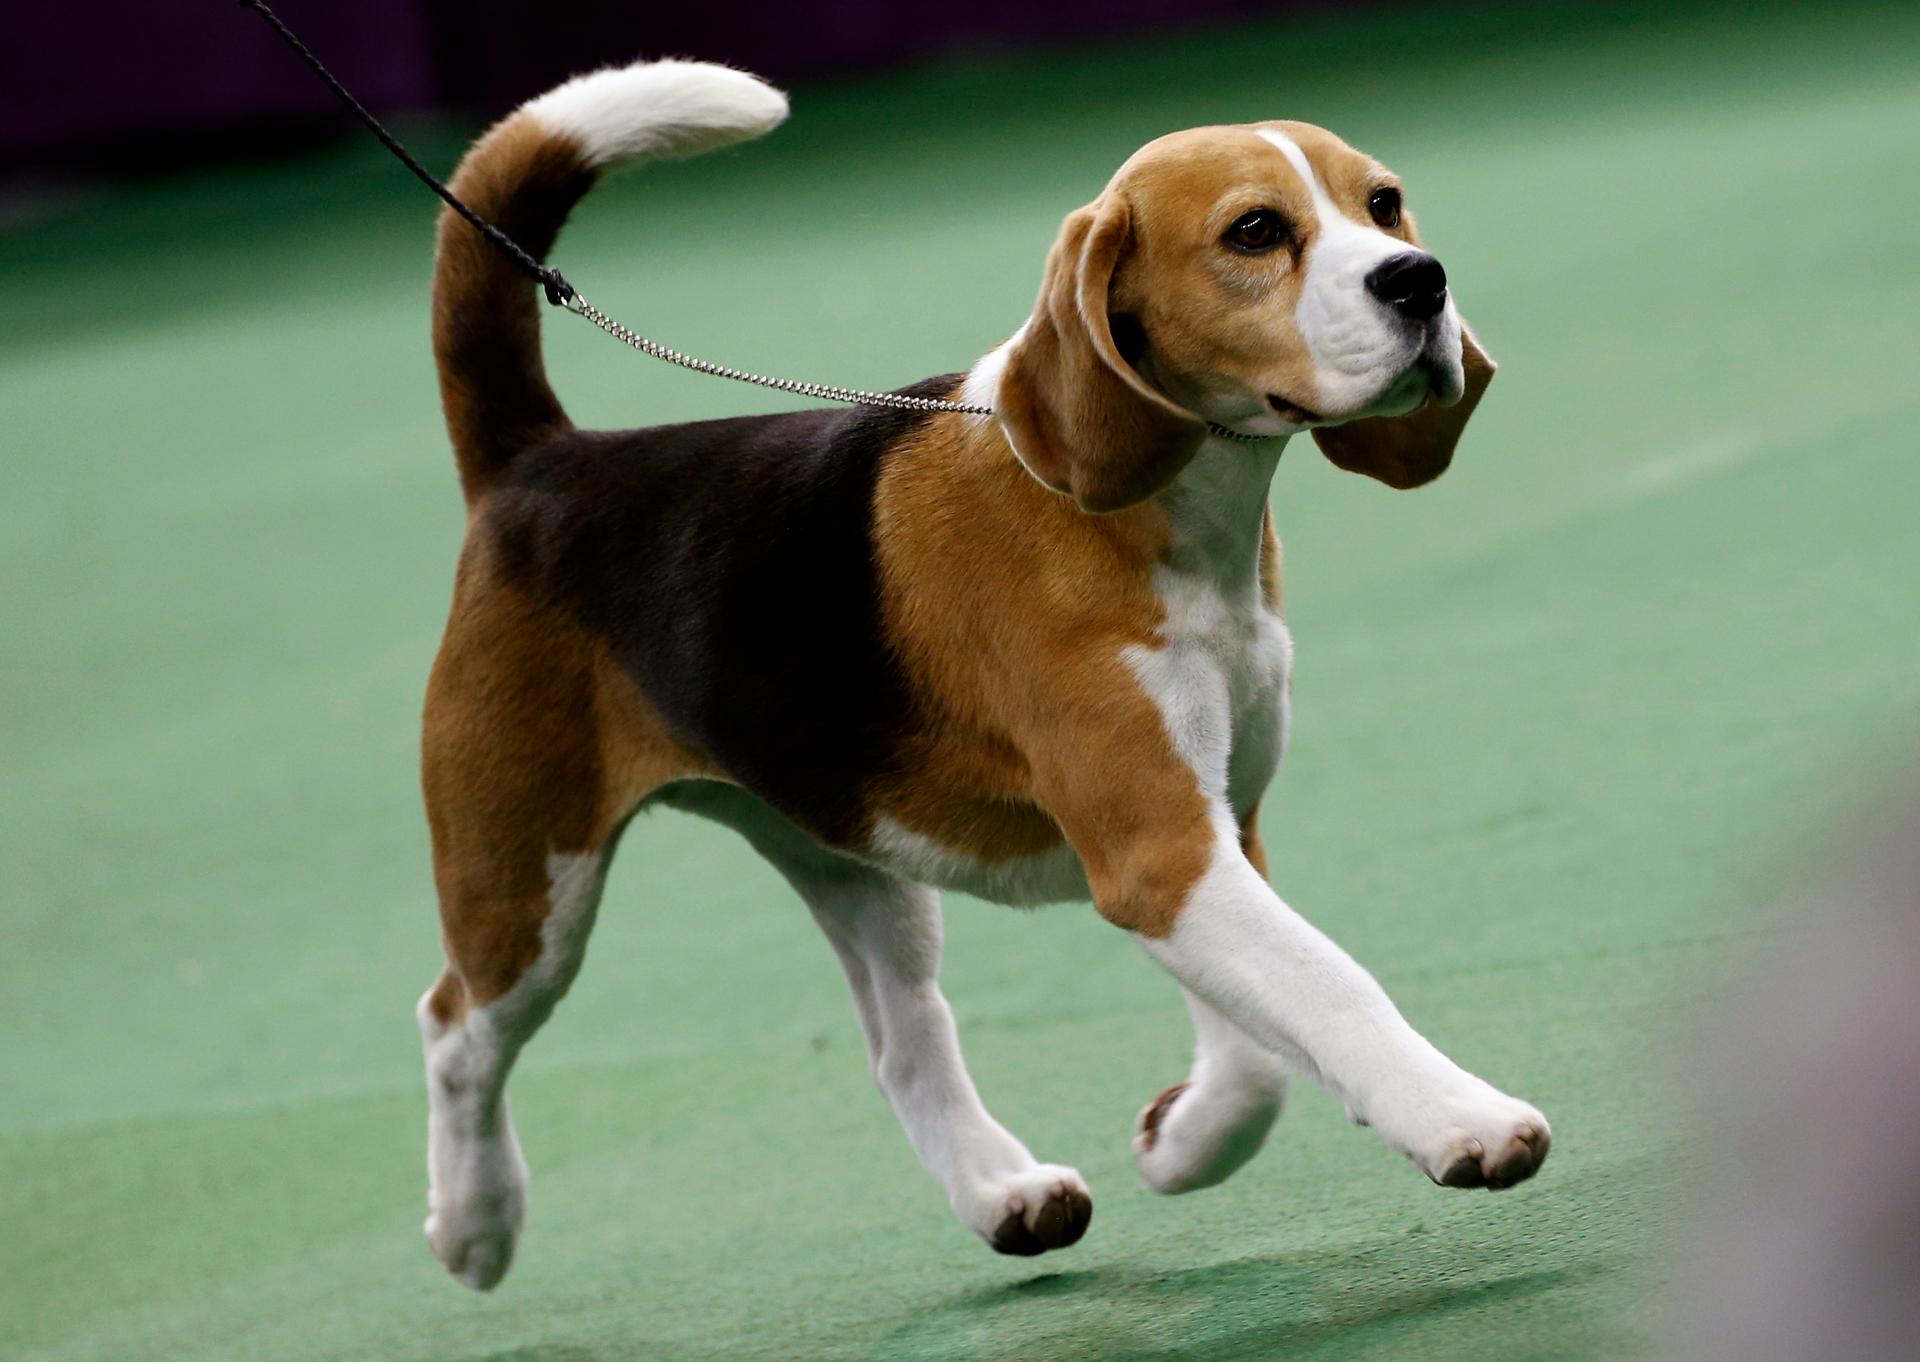 Miss P, a 15-inch Beagle who won "Best in Show," is run during the final judging at the 139th Westminster Kennel Club Dog Show at Madison Square Garden on February 17, 2015.